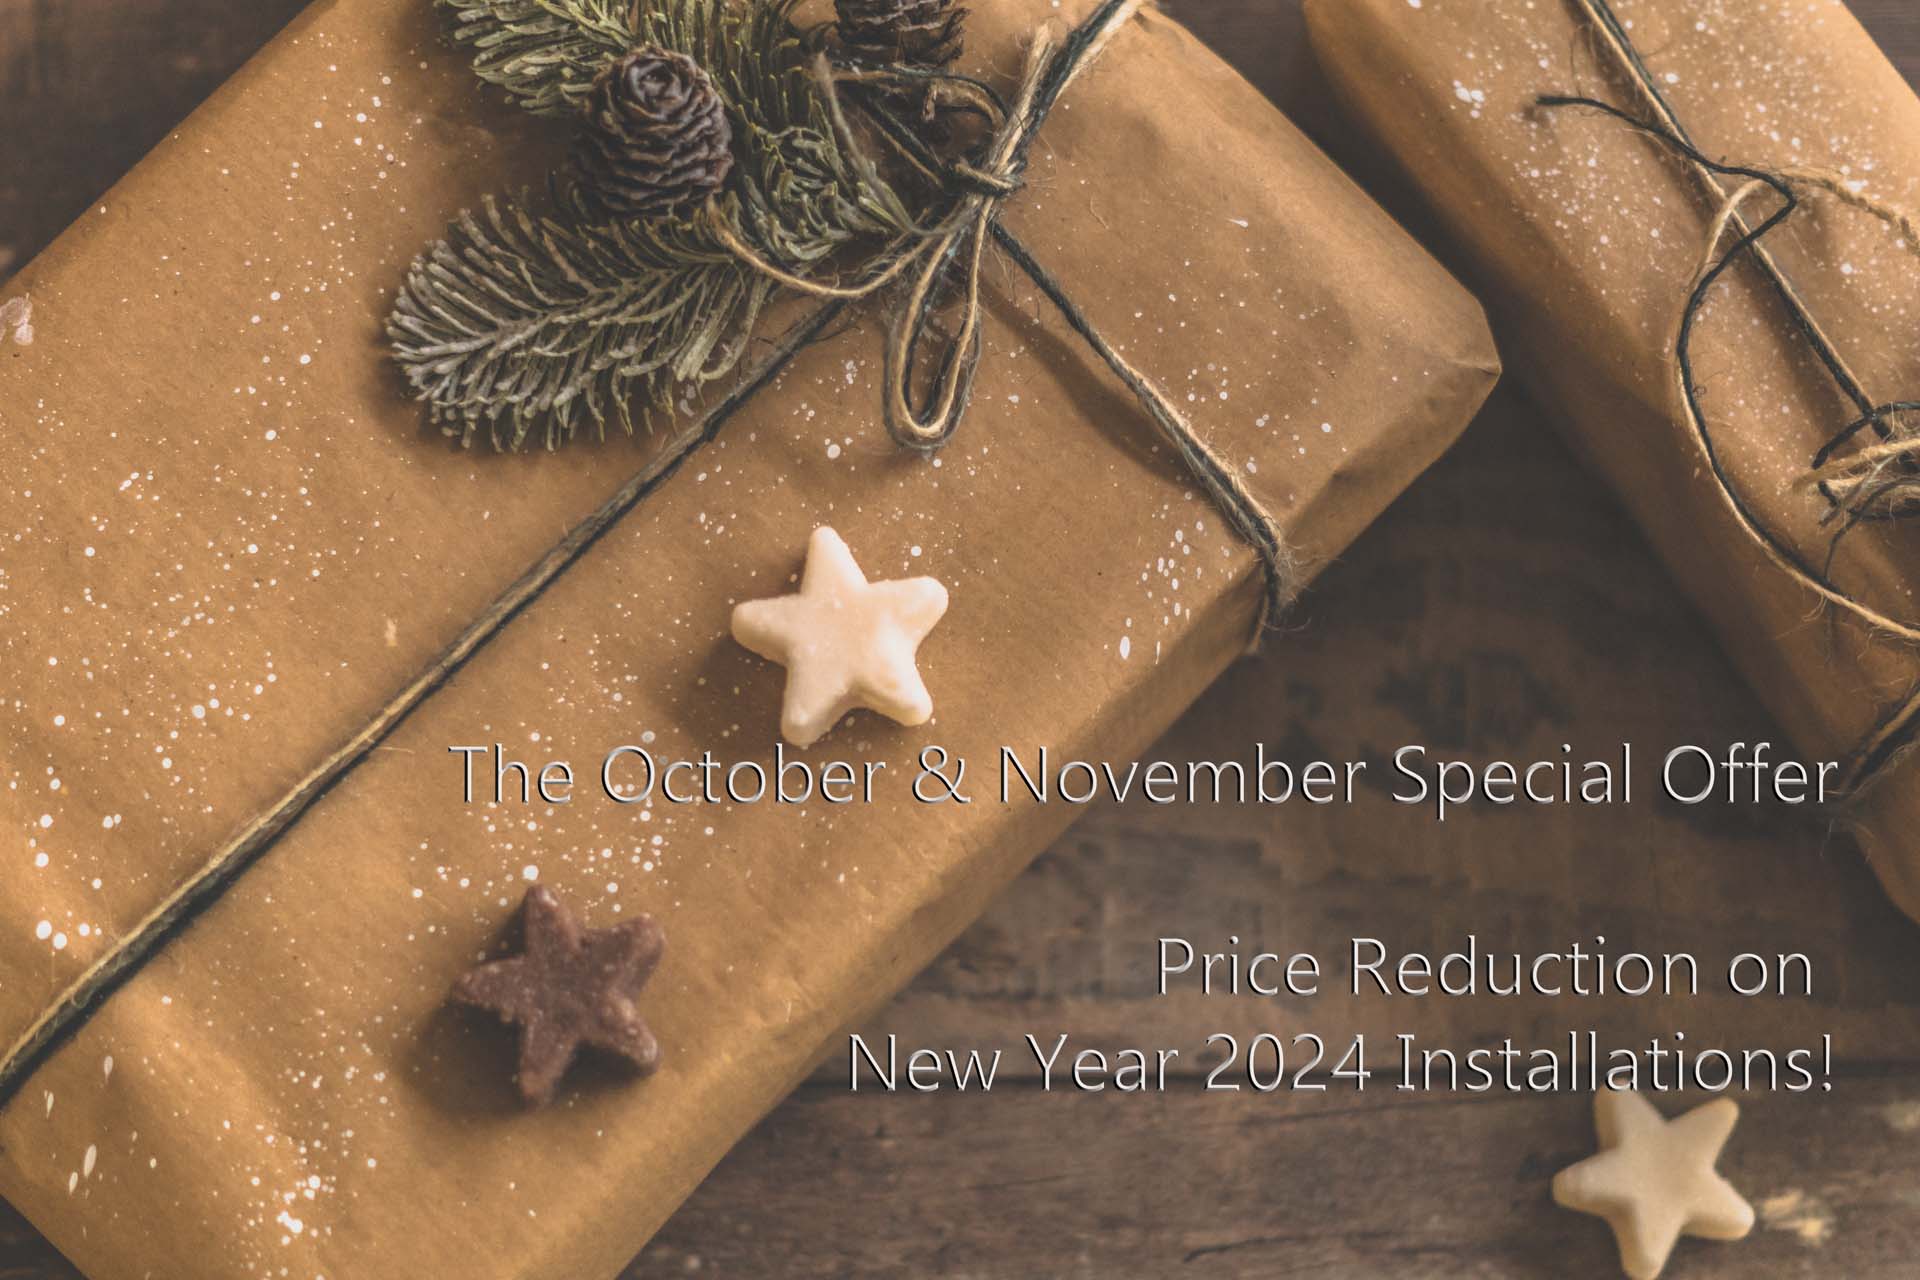 AG Christmas special offer October and November New Year discount